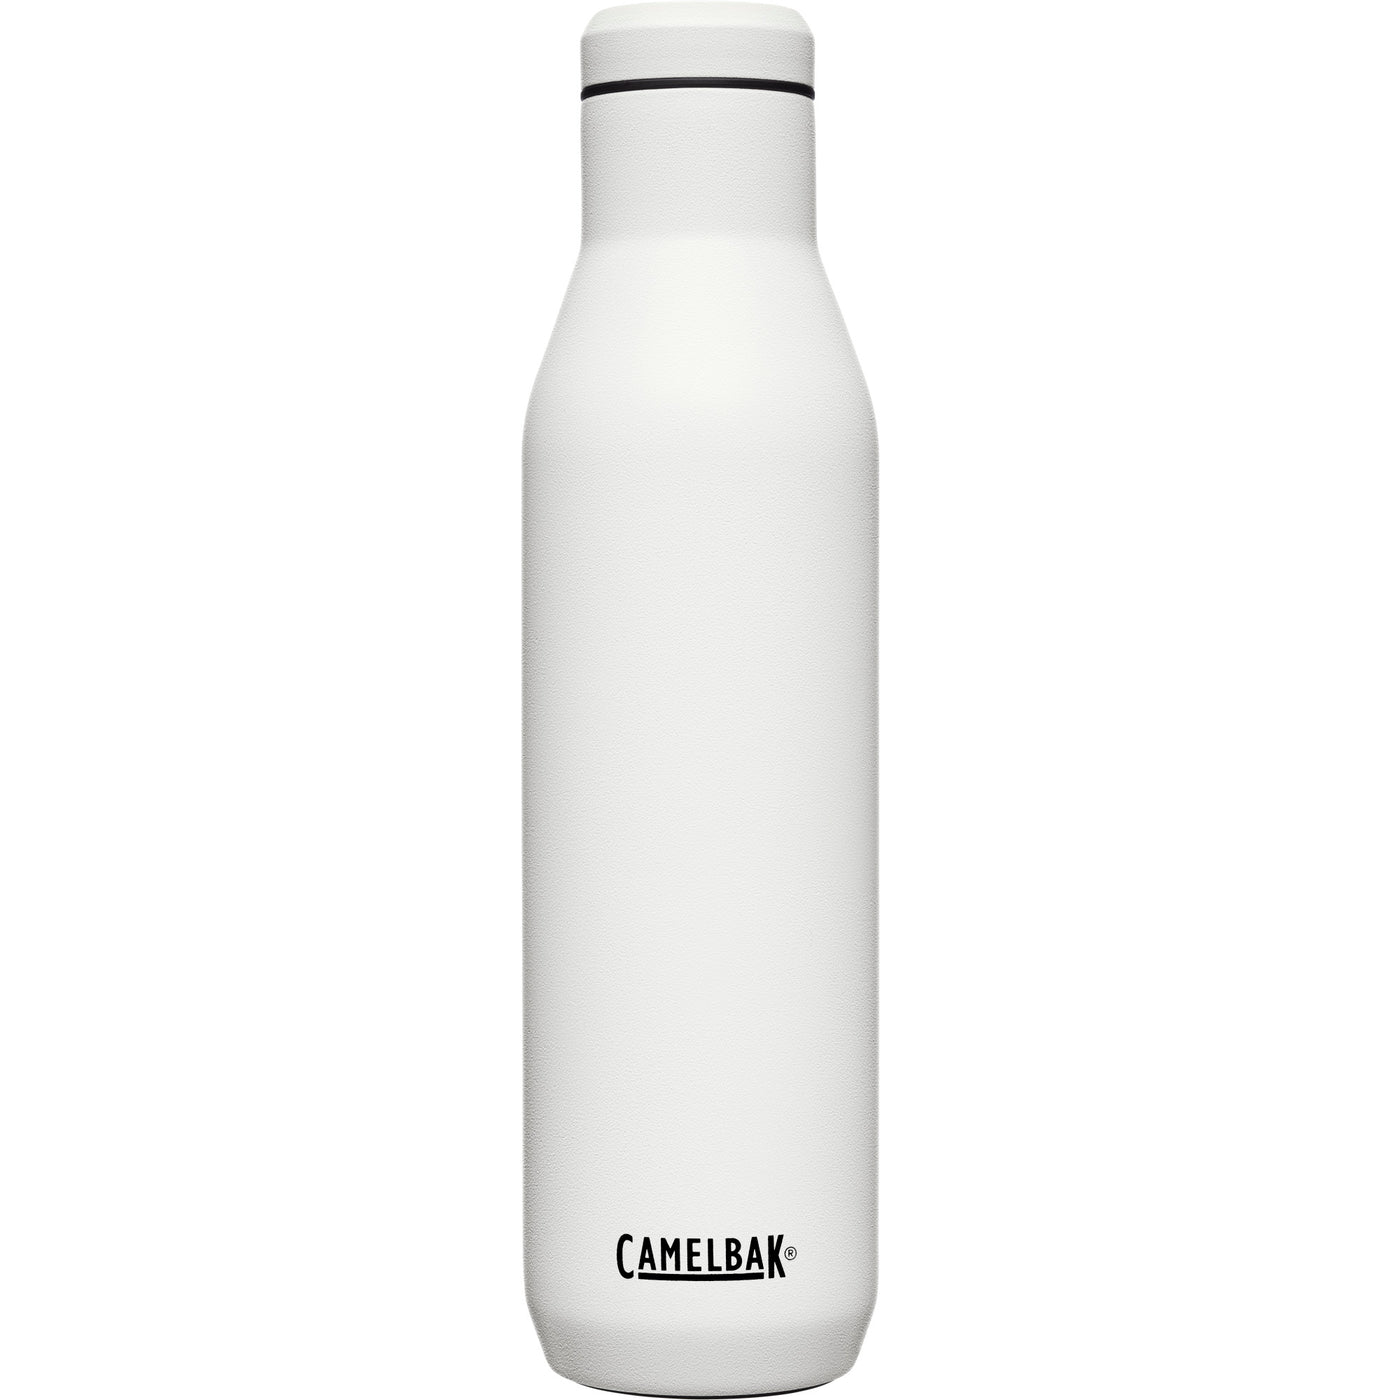 Bottle Stainless Steel Vacuum Insulated